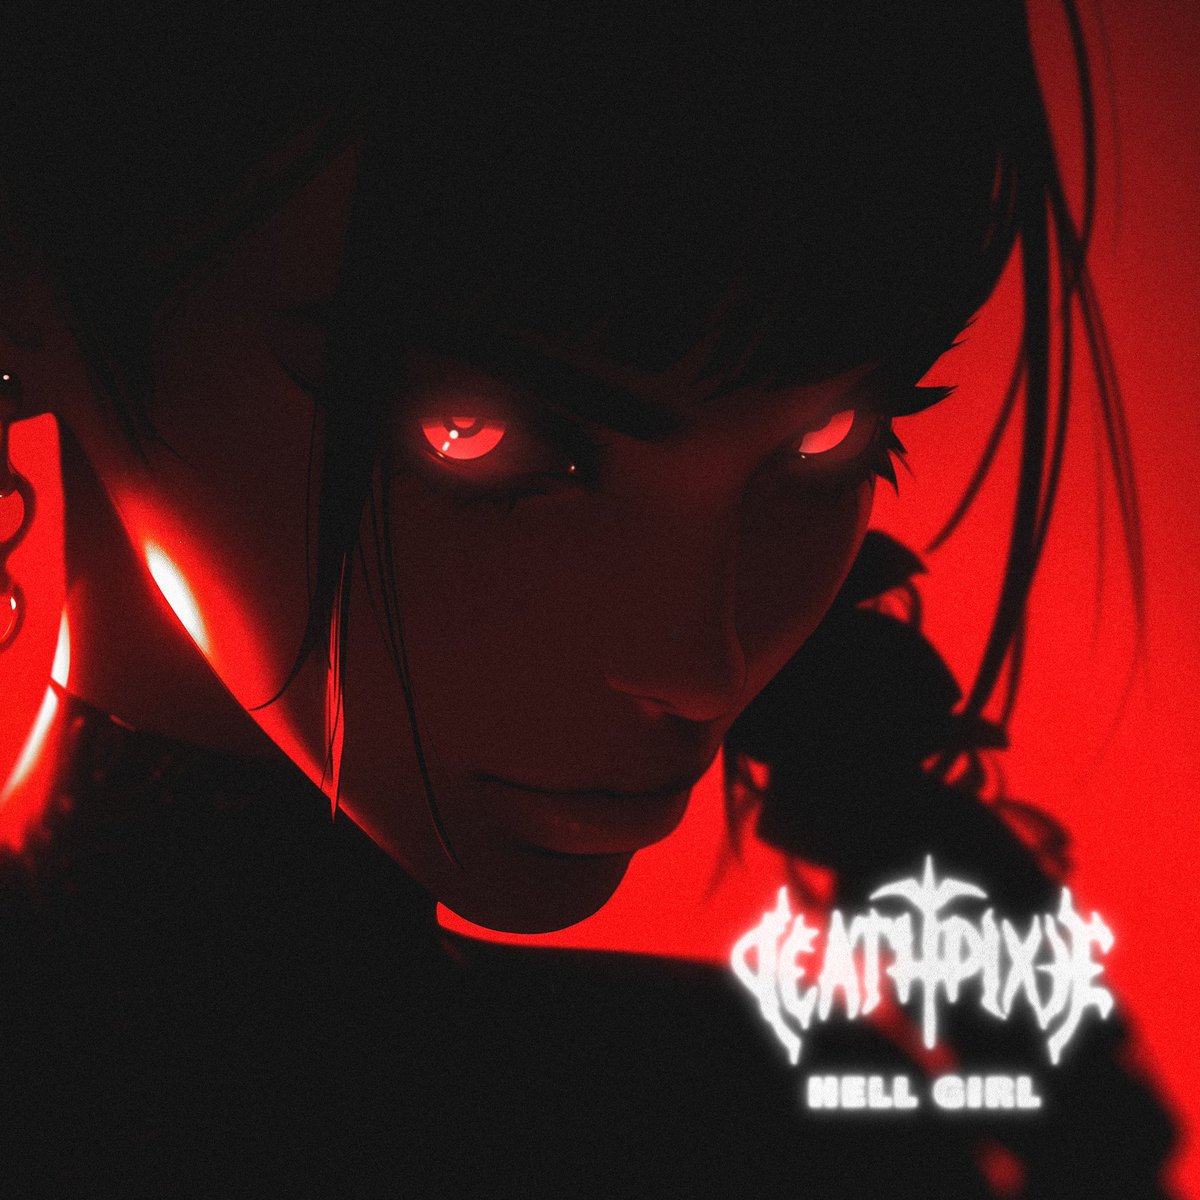 HELL GIRL is coming onchain first 🥀

Thank you for hitting The Spot Humies

This is how we build the future of music 🌐